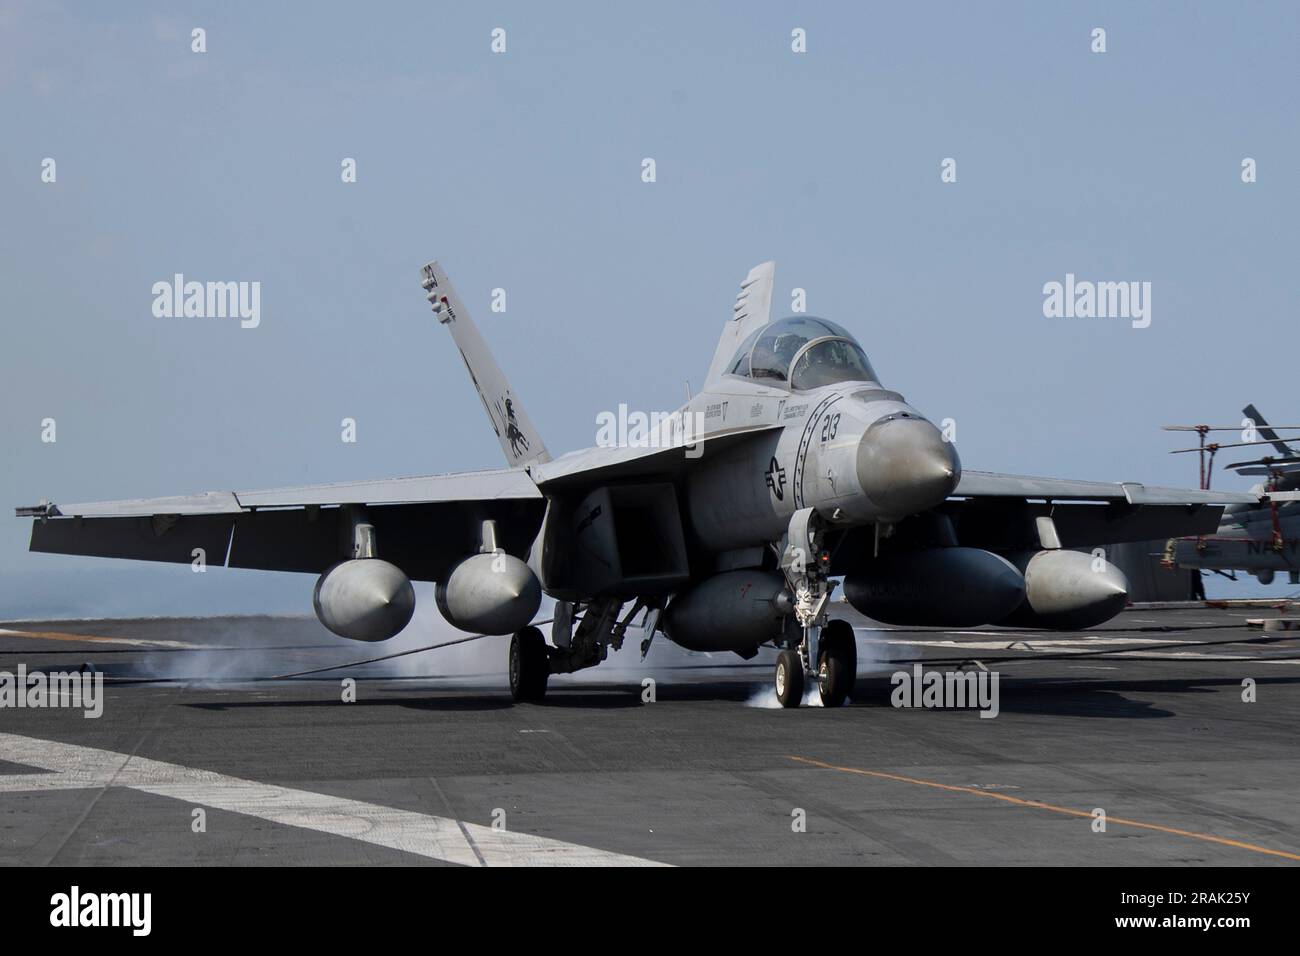 Mediterranean Sea, International Waters. 30 June, 2023. A U.S. Navy F/A-18F Super Hornet fighter jet, attached to the Black Lions of Strike Fighter Squadron 213, performs an arrested landing on the flight deck aboard the Nimitz-class aircraft carrier USS Gerald R. Ford operating on the Mediterranean Sea, June 30, 2023 off the coast of Italy.  Credit: MC3 Simon Pike/U.S. Navy Photo/Alamy Live News Stock Photo